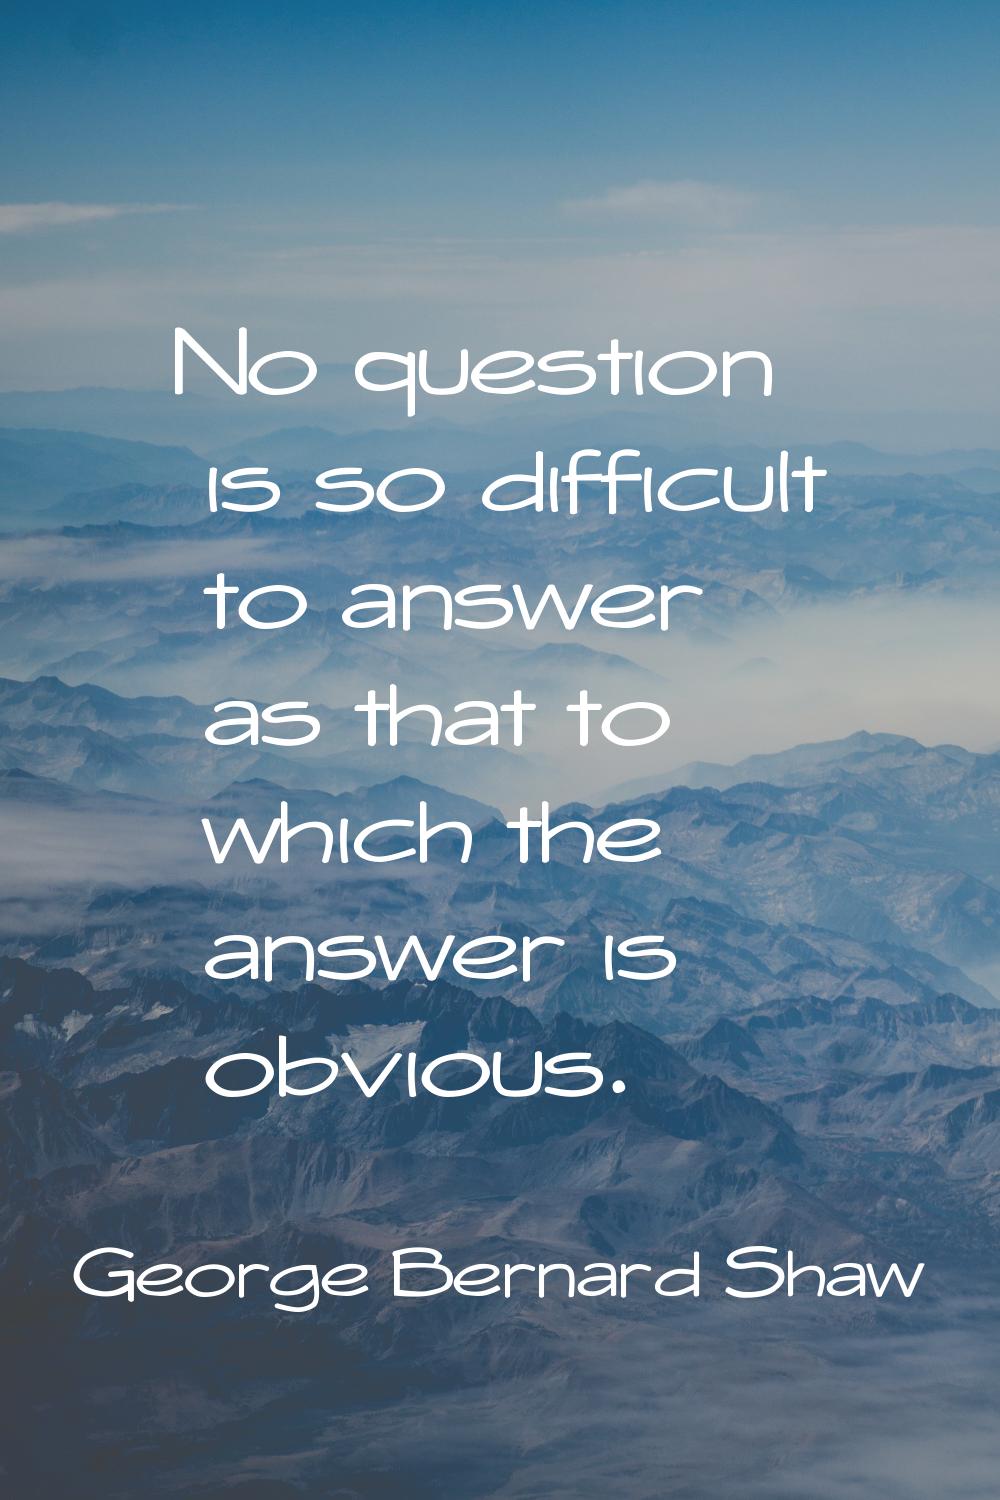 No question is so difficult to answer as that to which the answer is obvious.